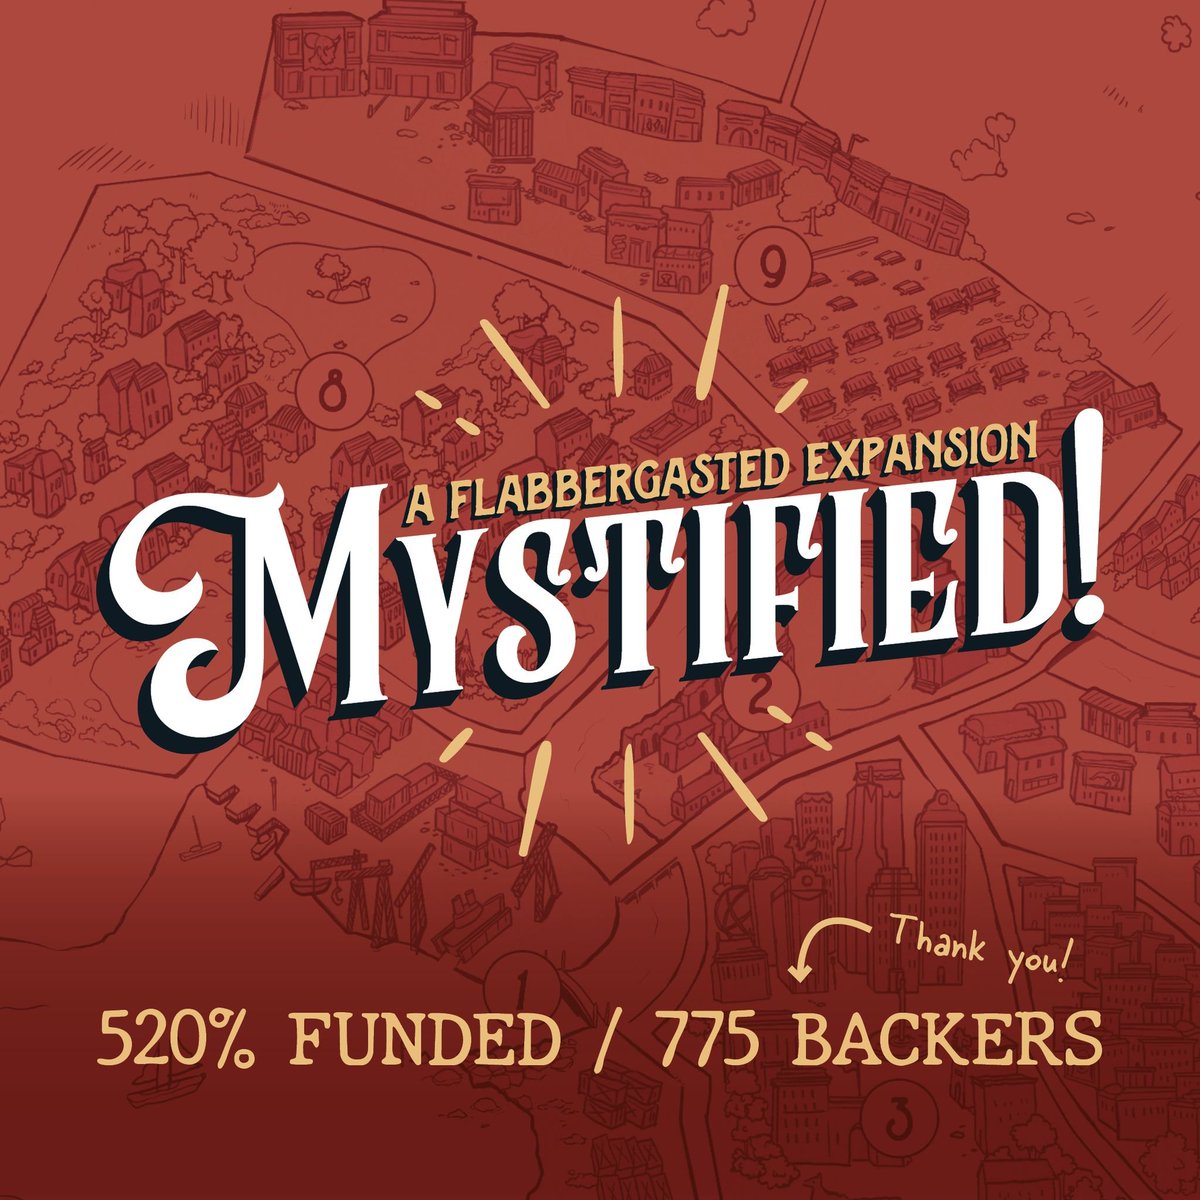 It's been a few days since our Mystified campaign ended and we couldn't be happier with the outcome 🥰 Thank you to all who've supported us 💕 Now time for a short break before getting back to work on writing this game 🙌